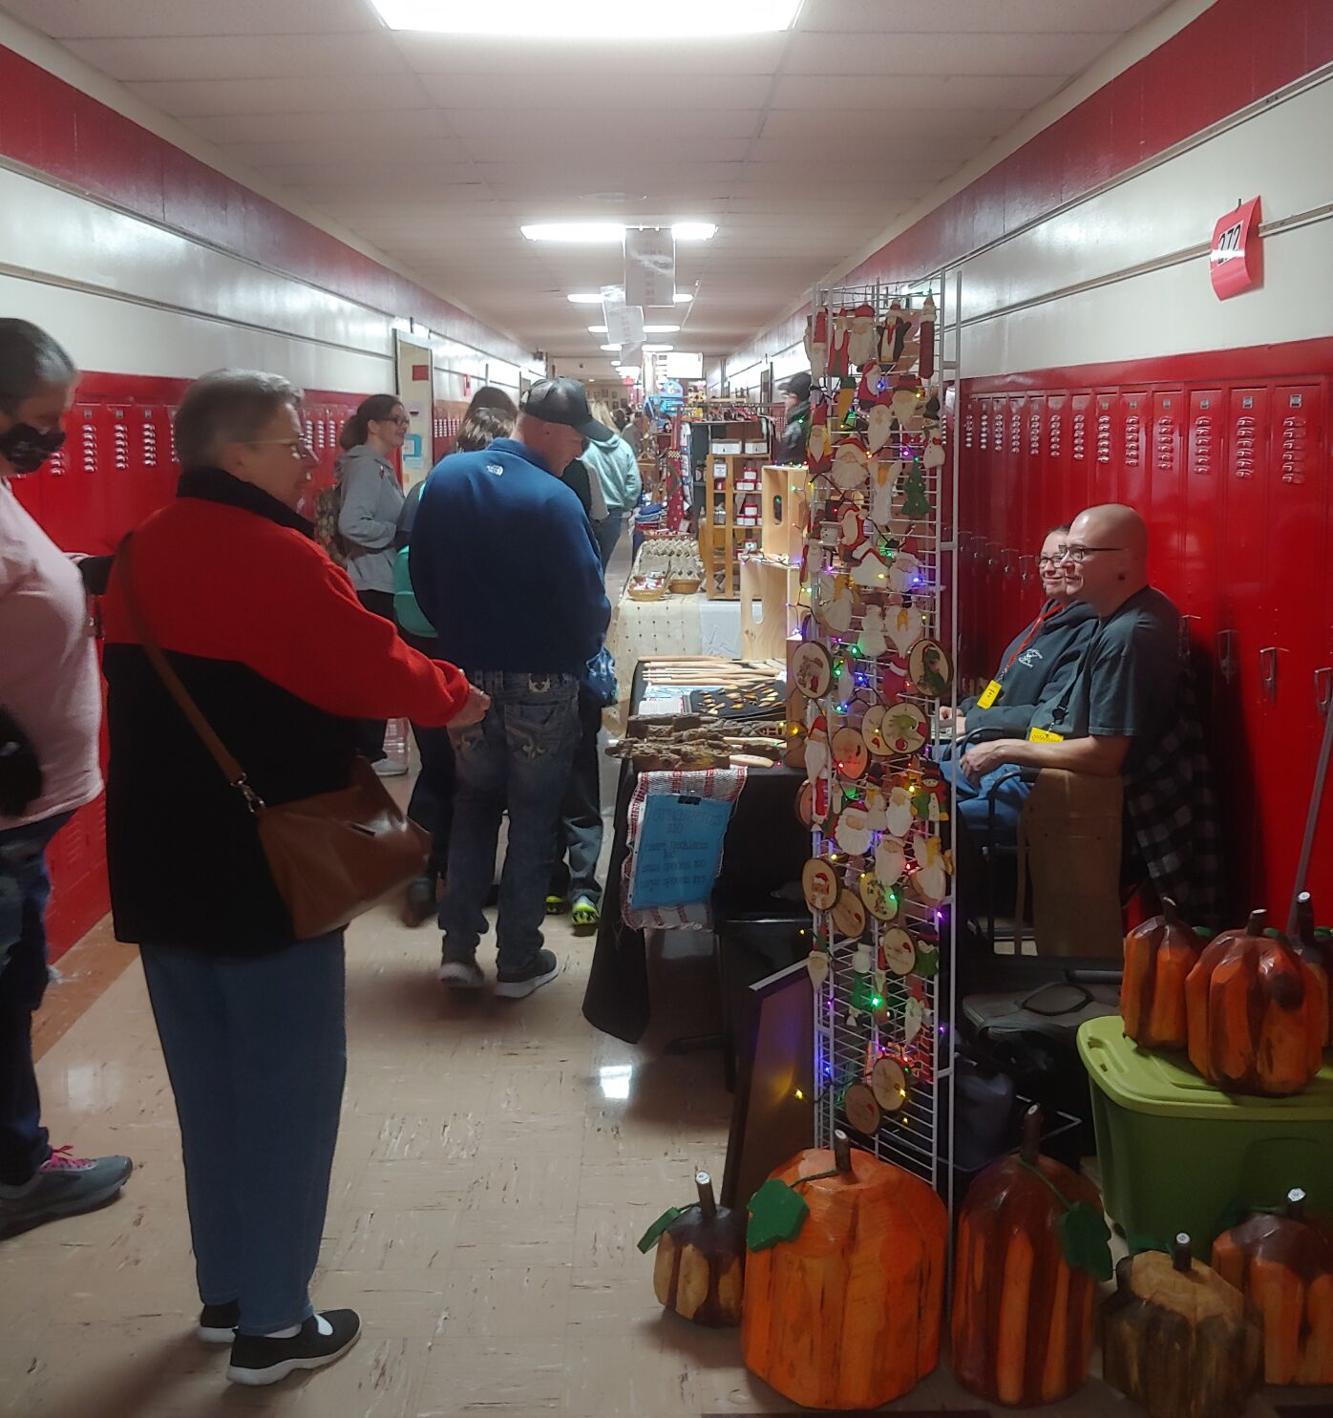 PHOTO GALLERY Union Middle School Craft Fair back for 37th time Fair